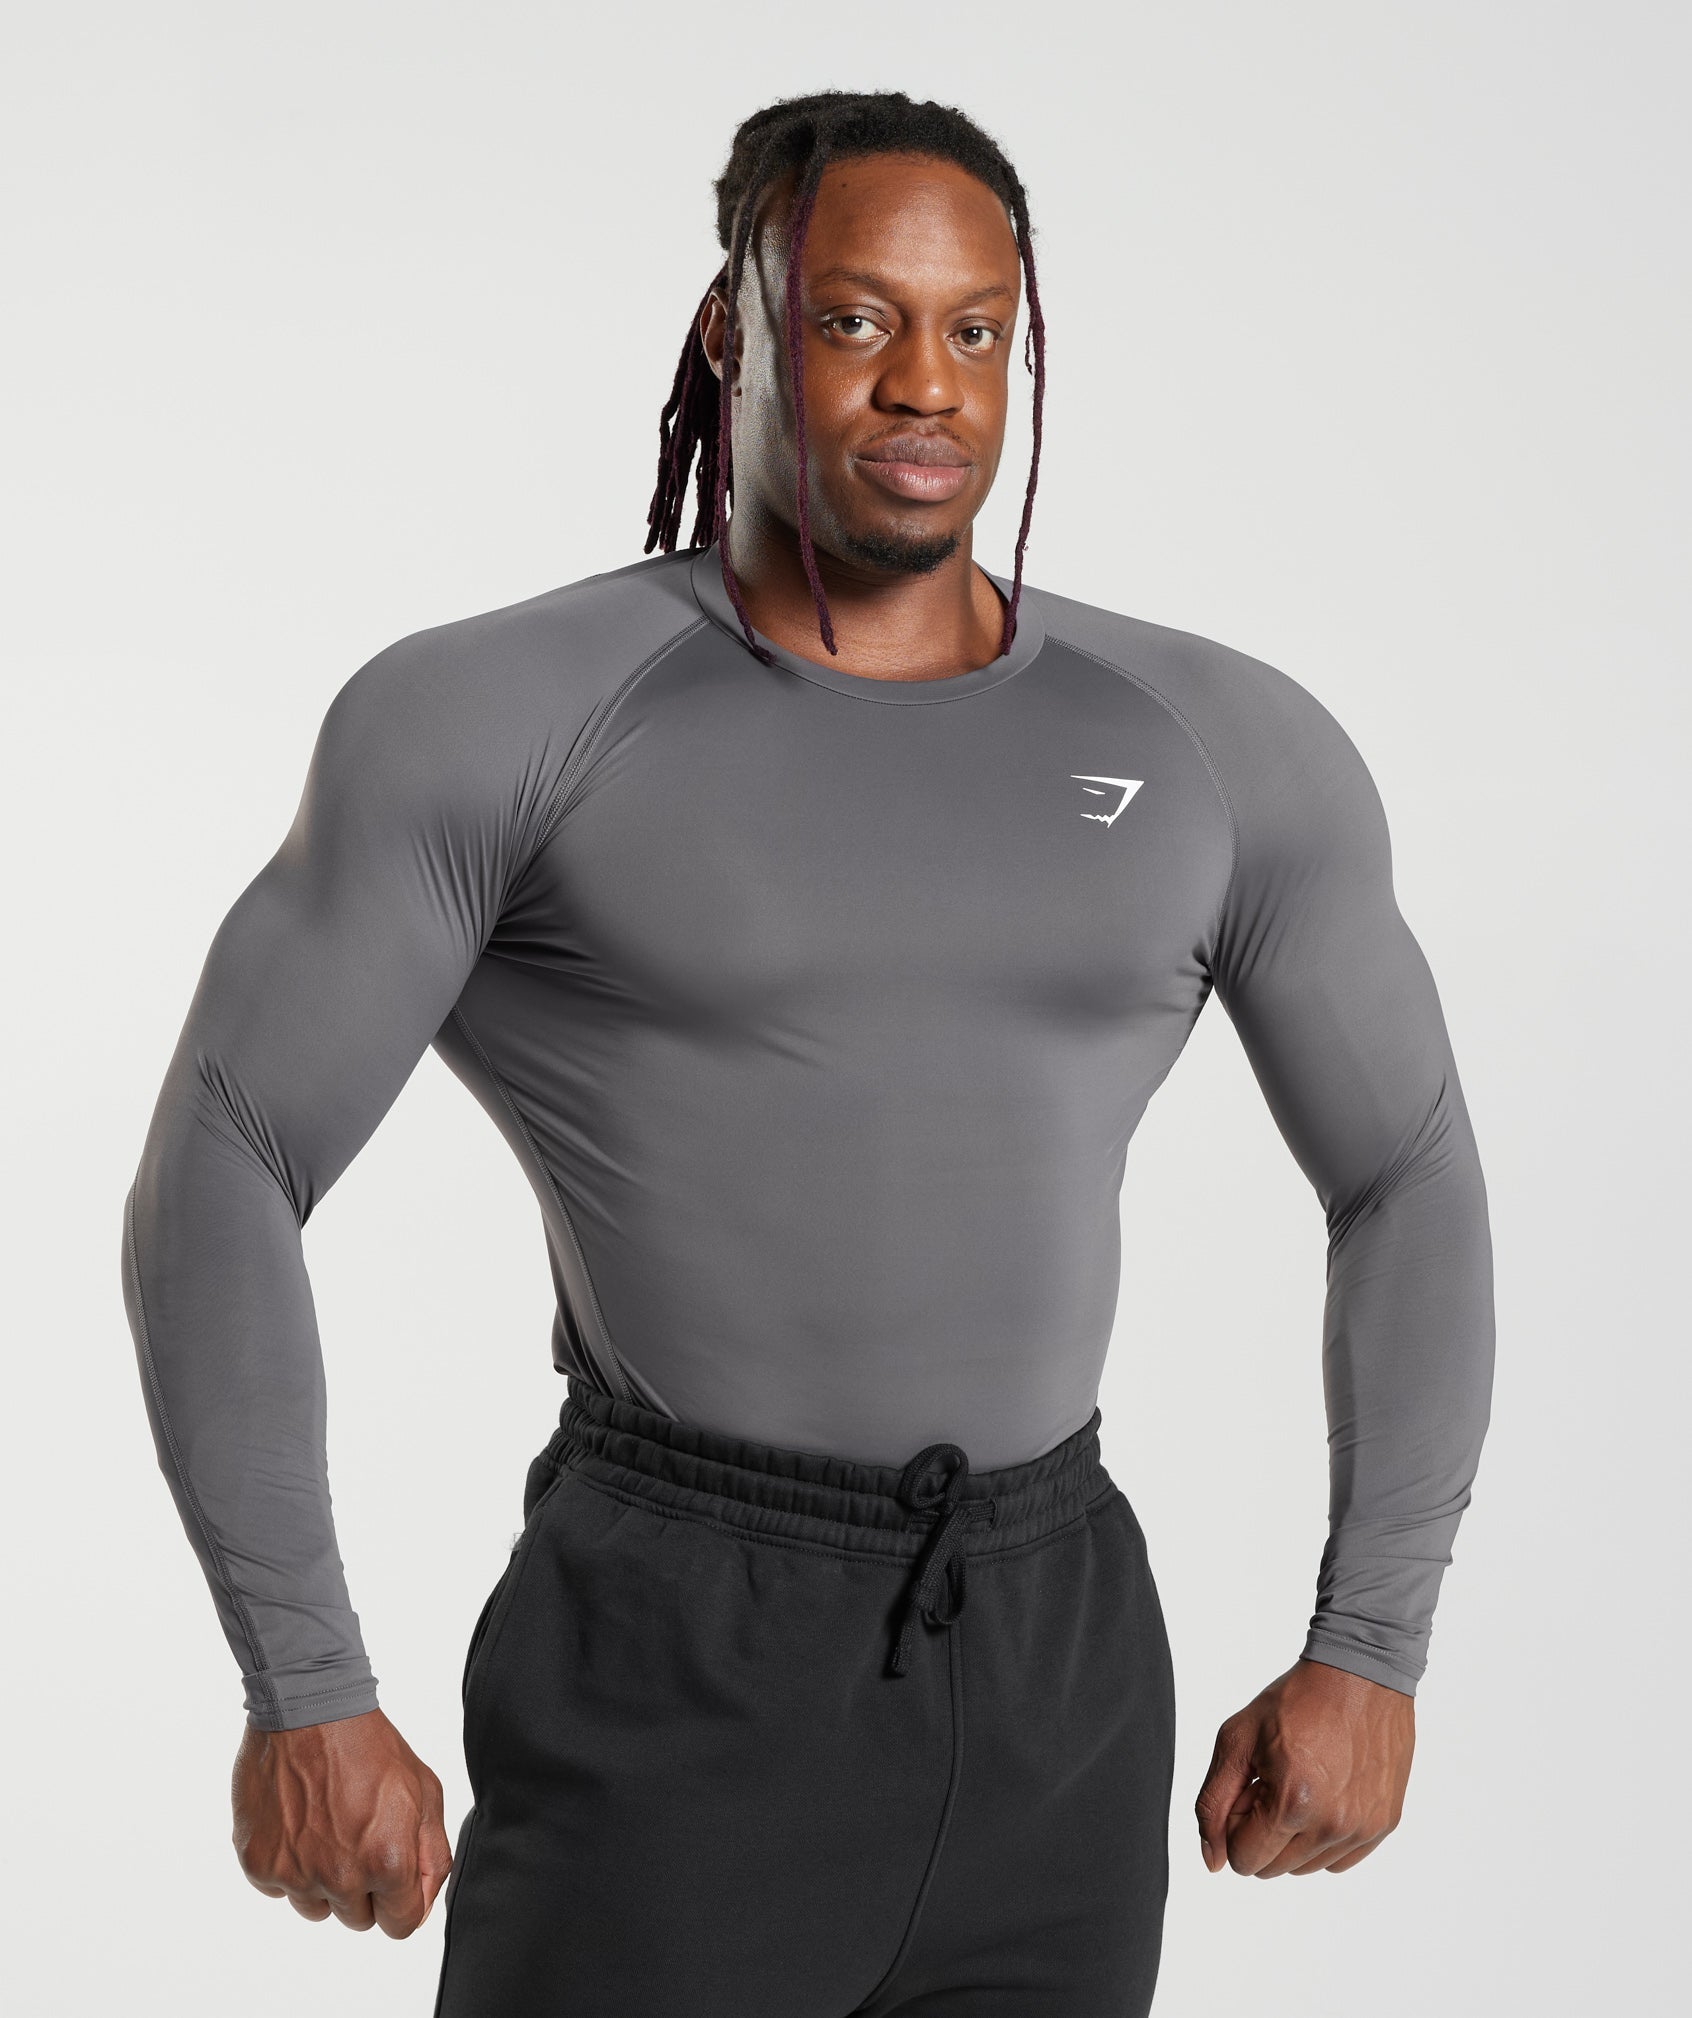 Men's Base Layers, Workout & Fitness Clothing